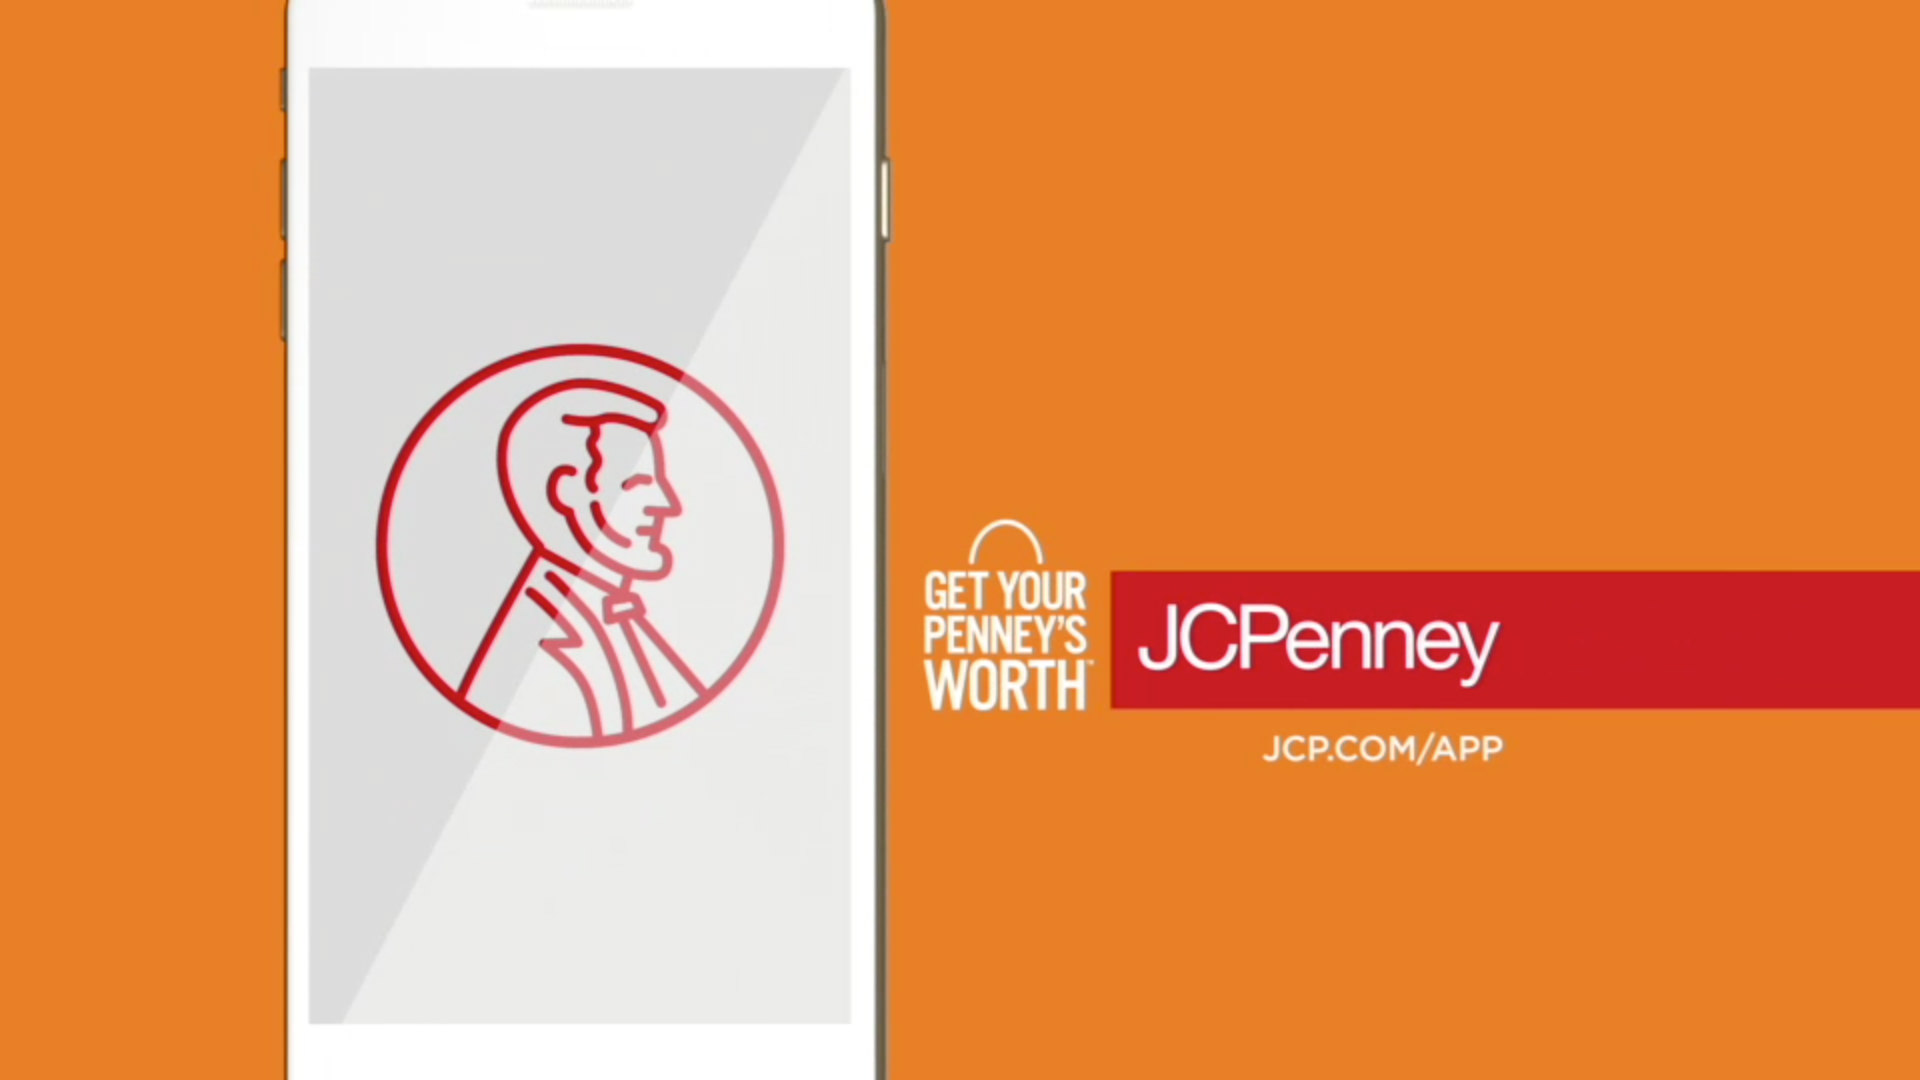 THE JCPENNEY MOBILE APP: New Features at Your Fingertips - Penney